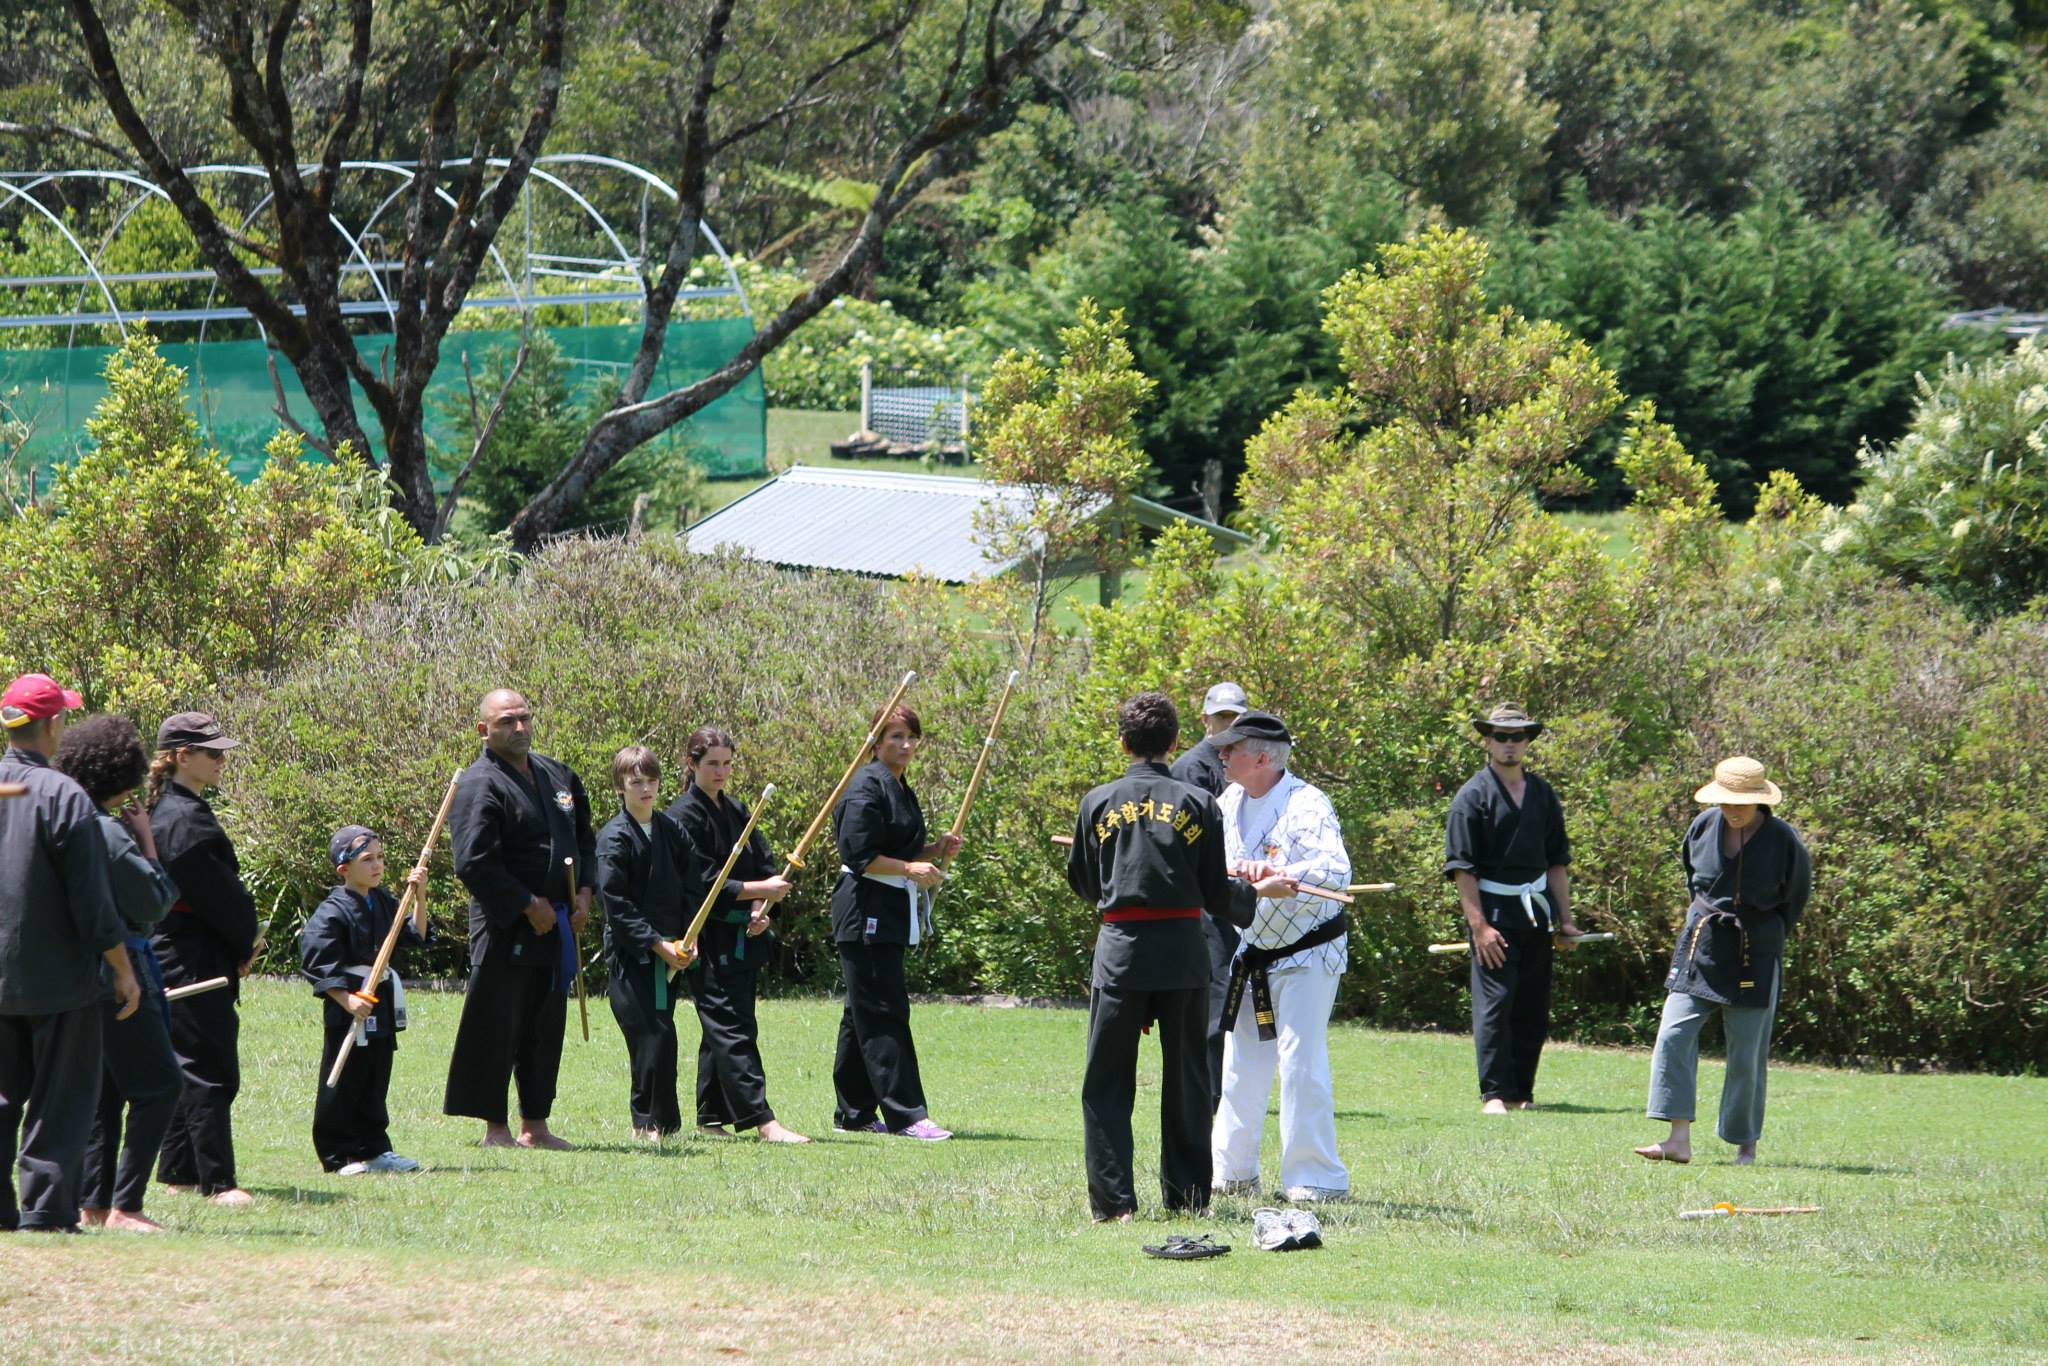 Hapkido training on the sports field